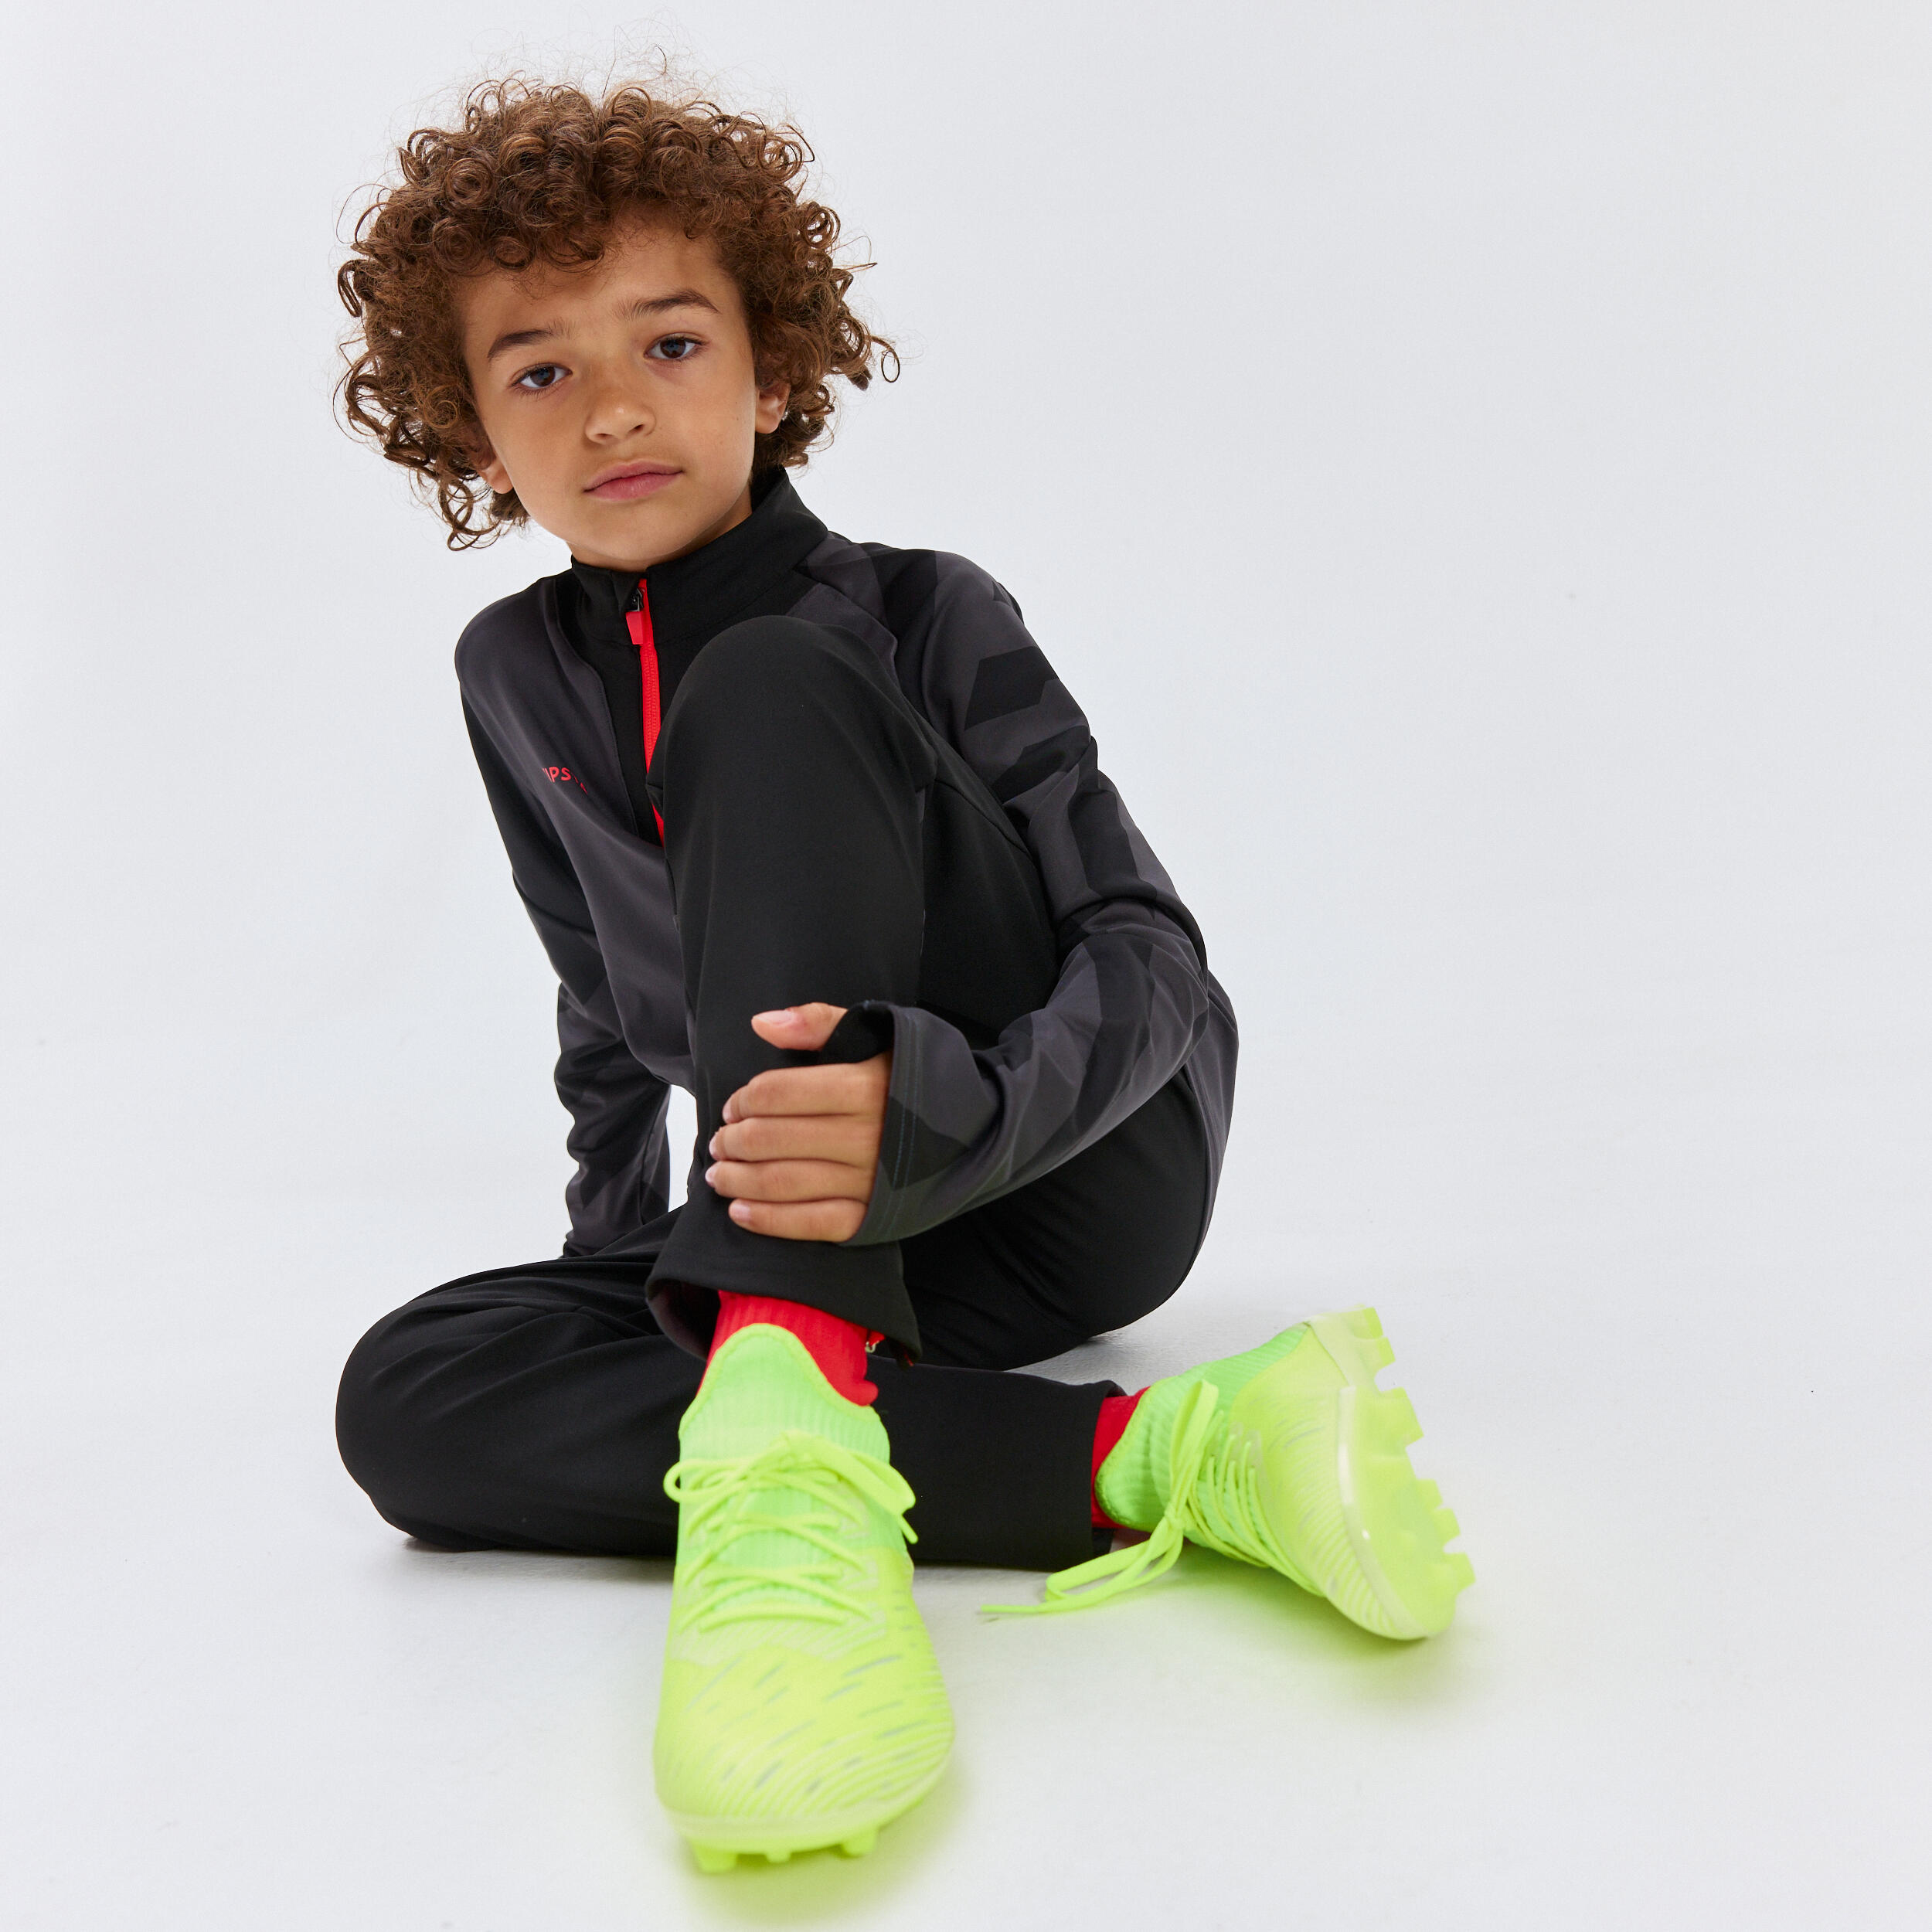 Kids' Lace-Up Football Boots CLR Turf - Neon Yellow 11/11